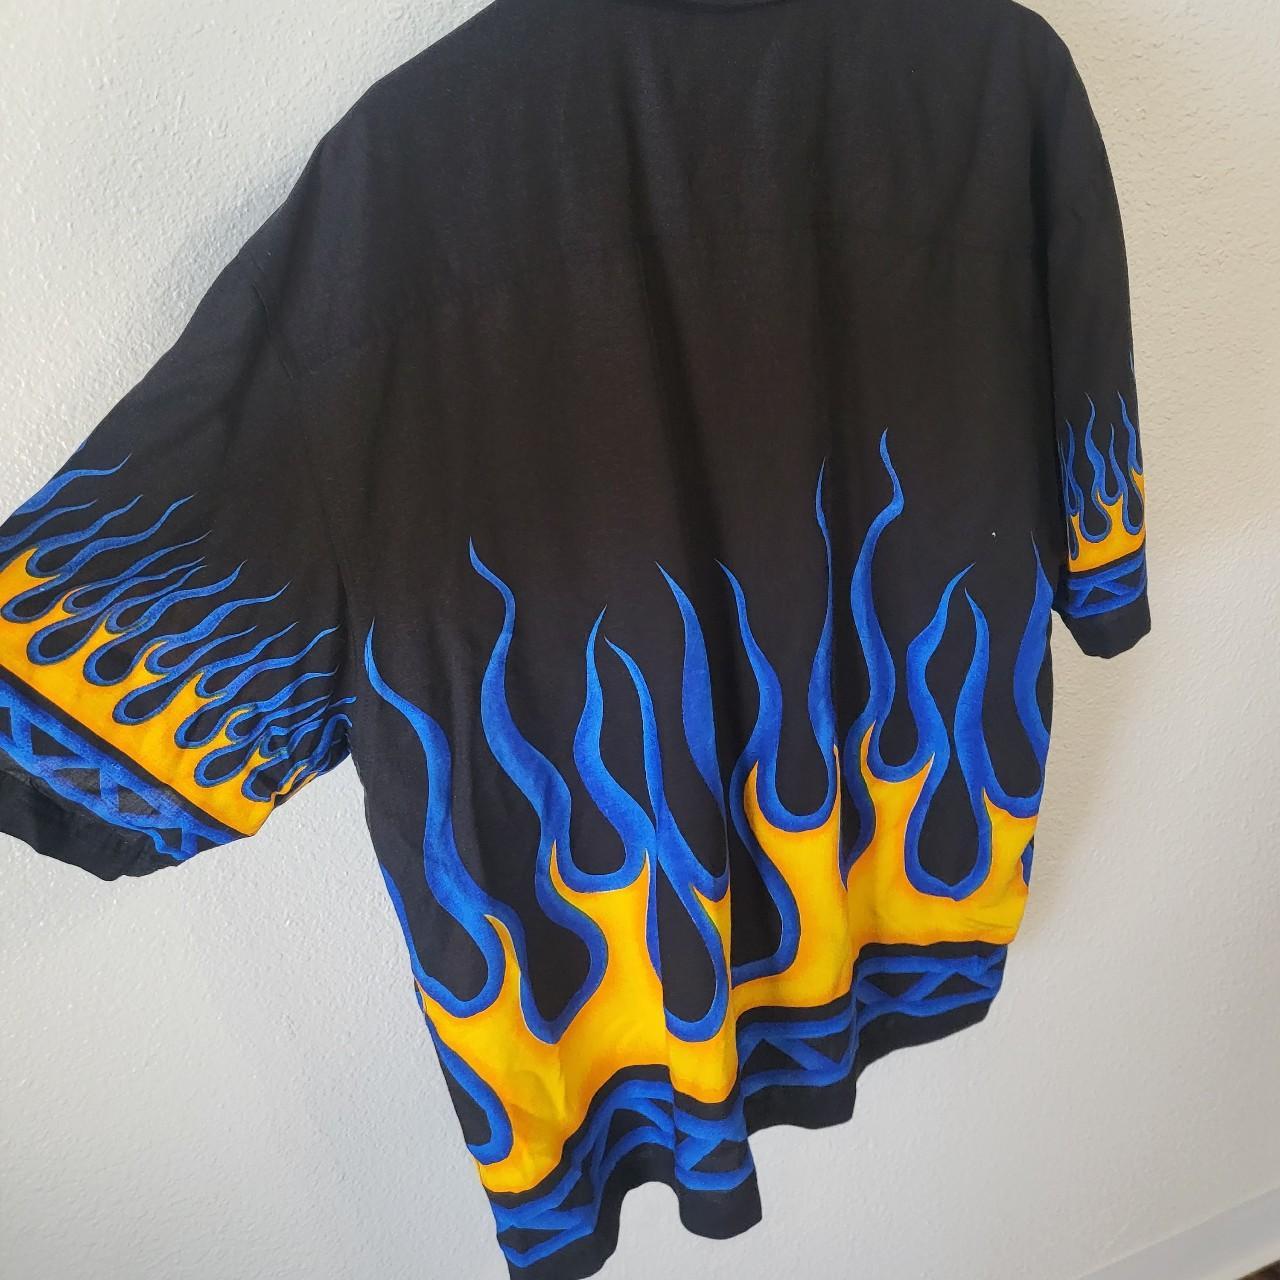 GUY FIERI - ESQUE FLAME SHIRT Message me with any - Depop